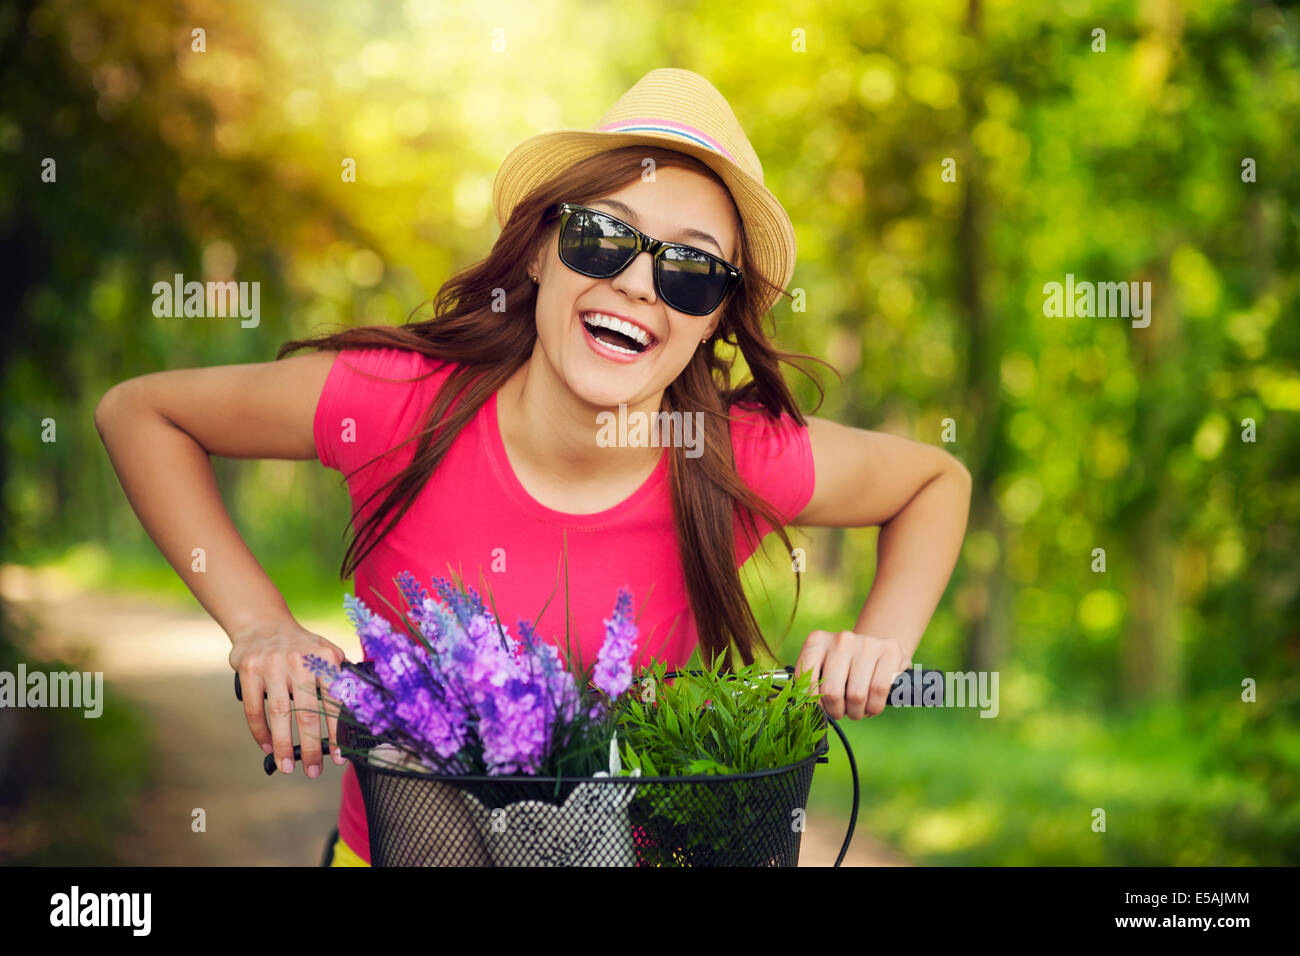 Happy woman spending time in nature, Debica, Poland. Stock Photo